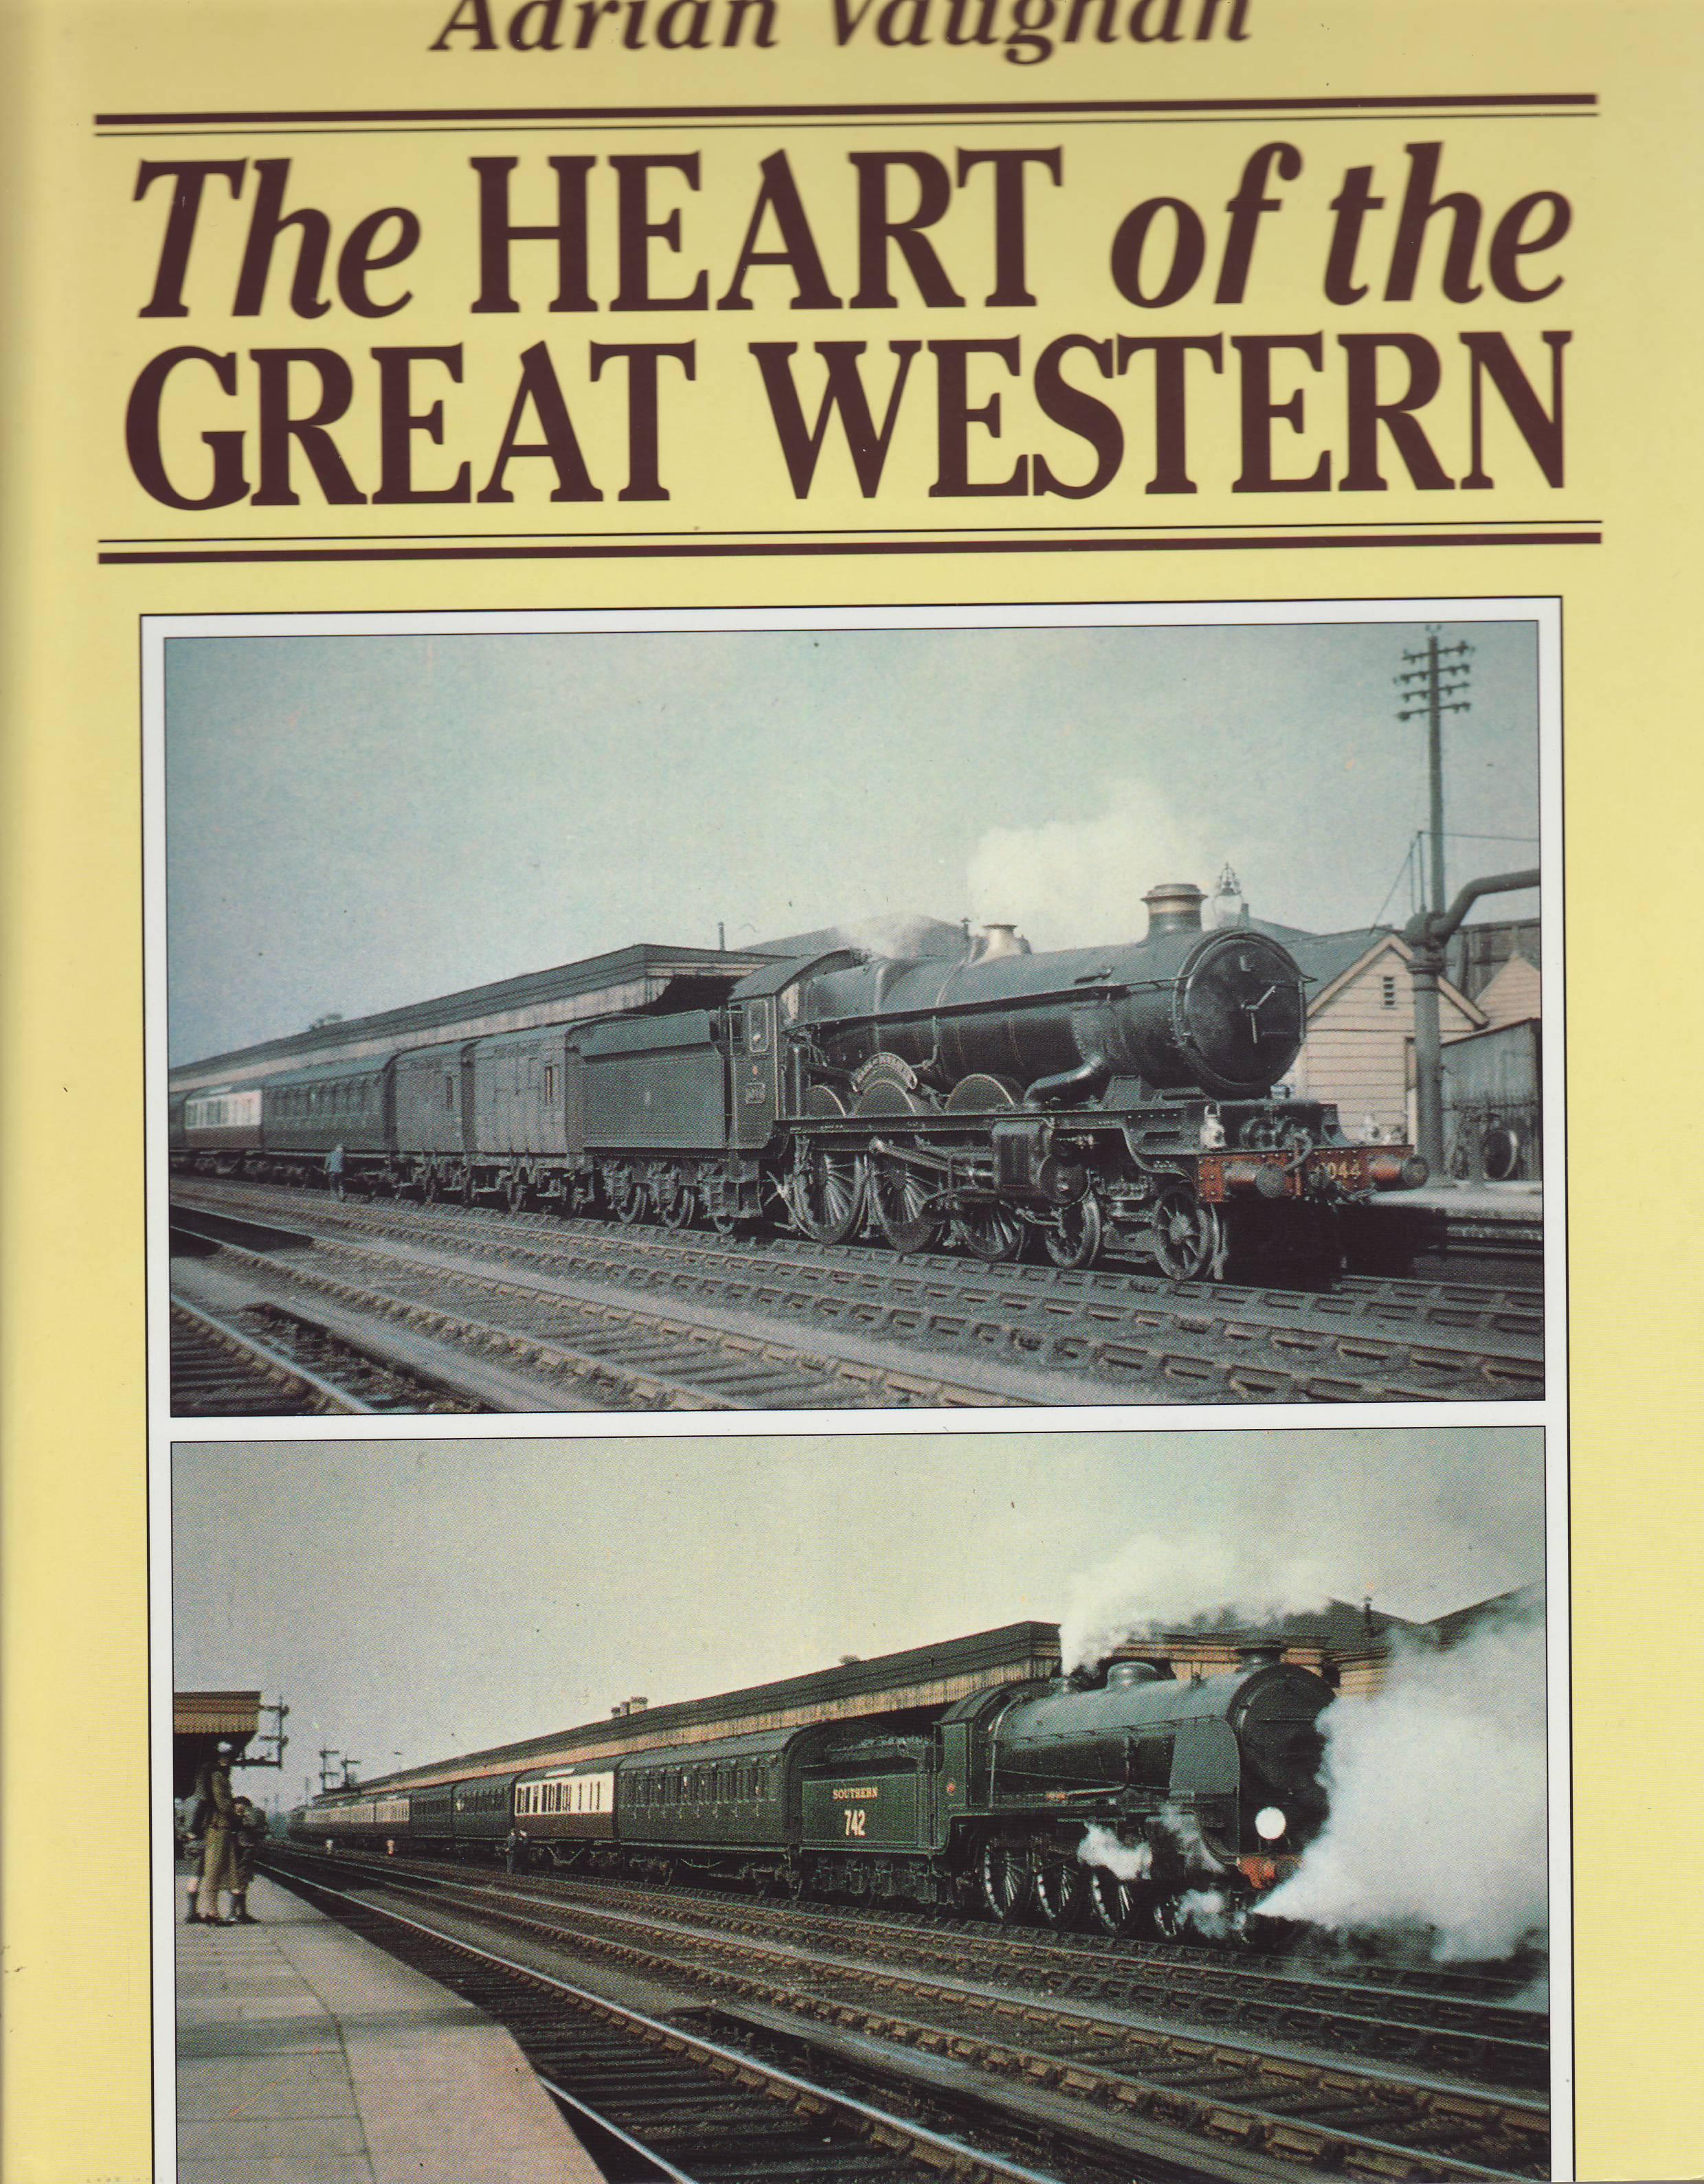 The Heart of the Great Western - Vaughan, Adrian